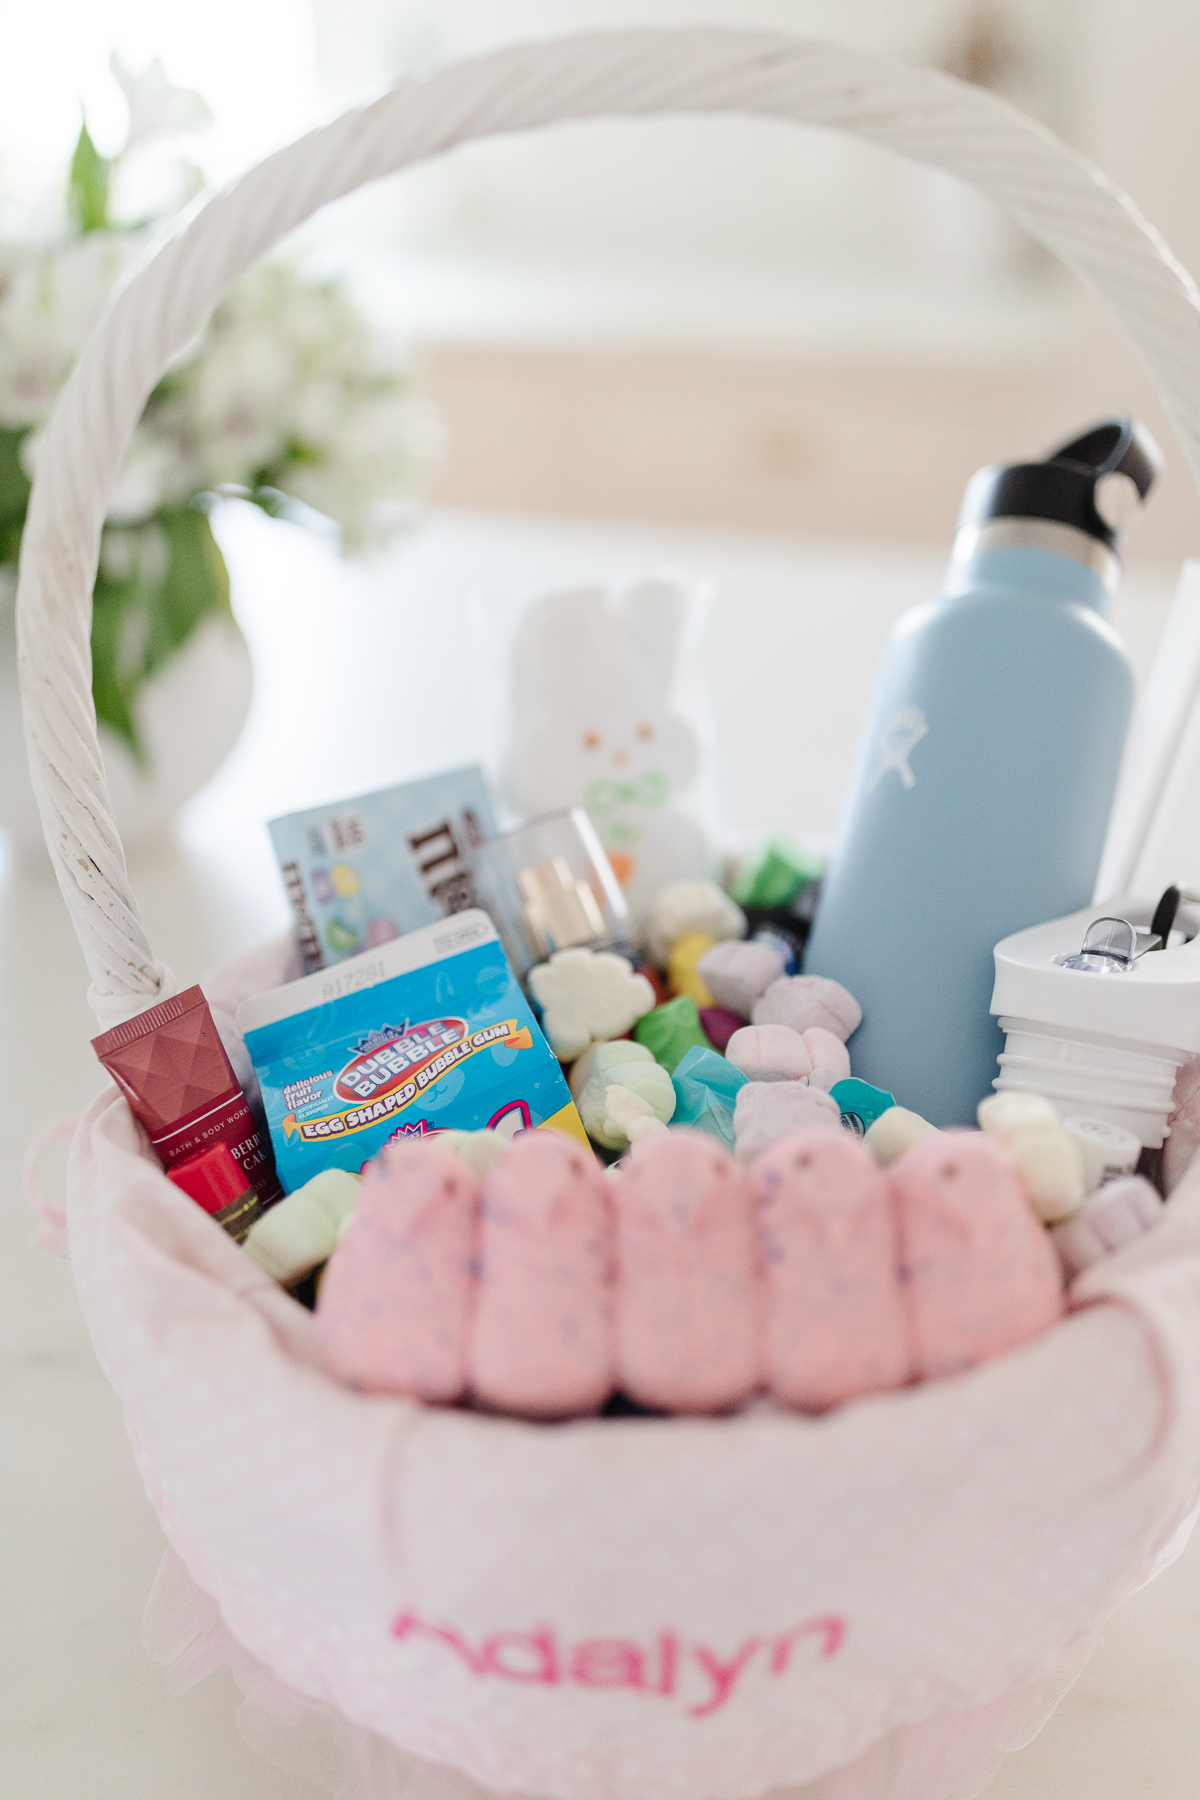 A water bottle is included with the easter basket fillers.